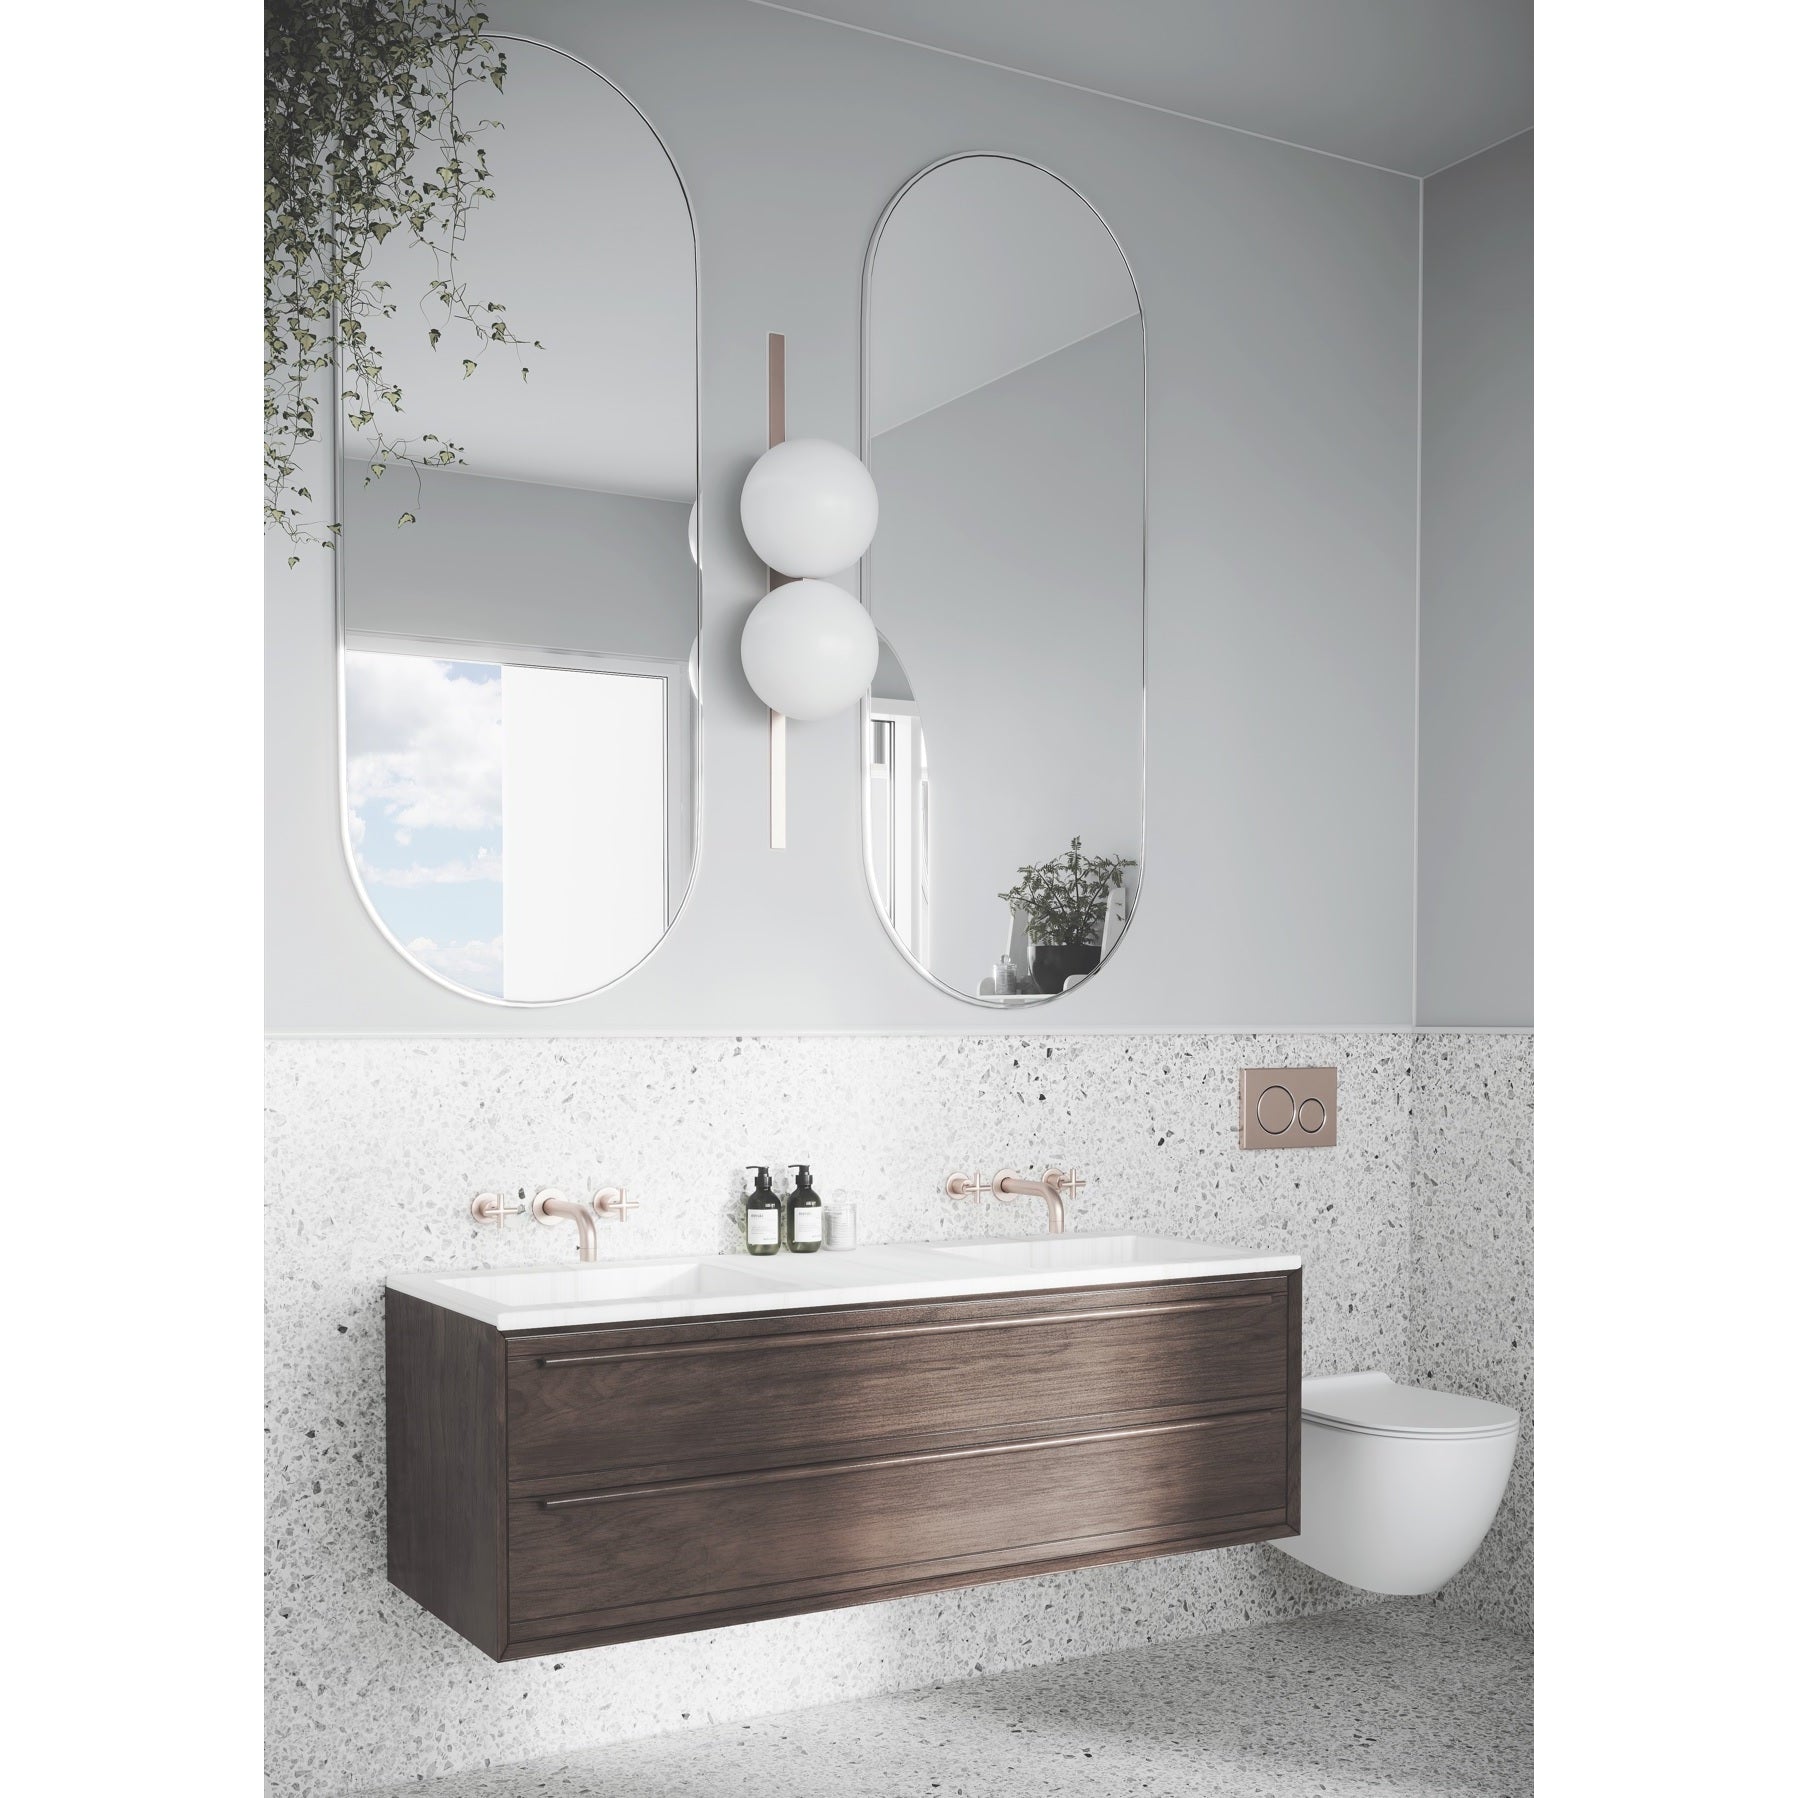 Sigma 21 Dual Flush Plate by Geberit - Champagne